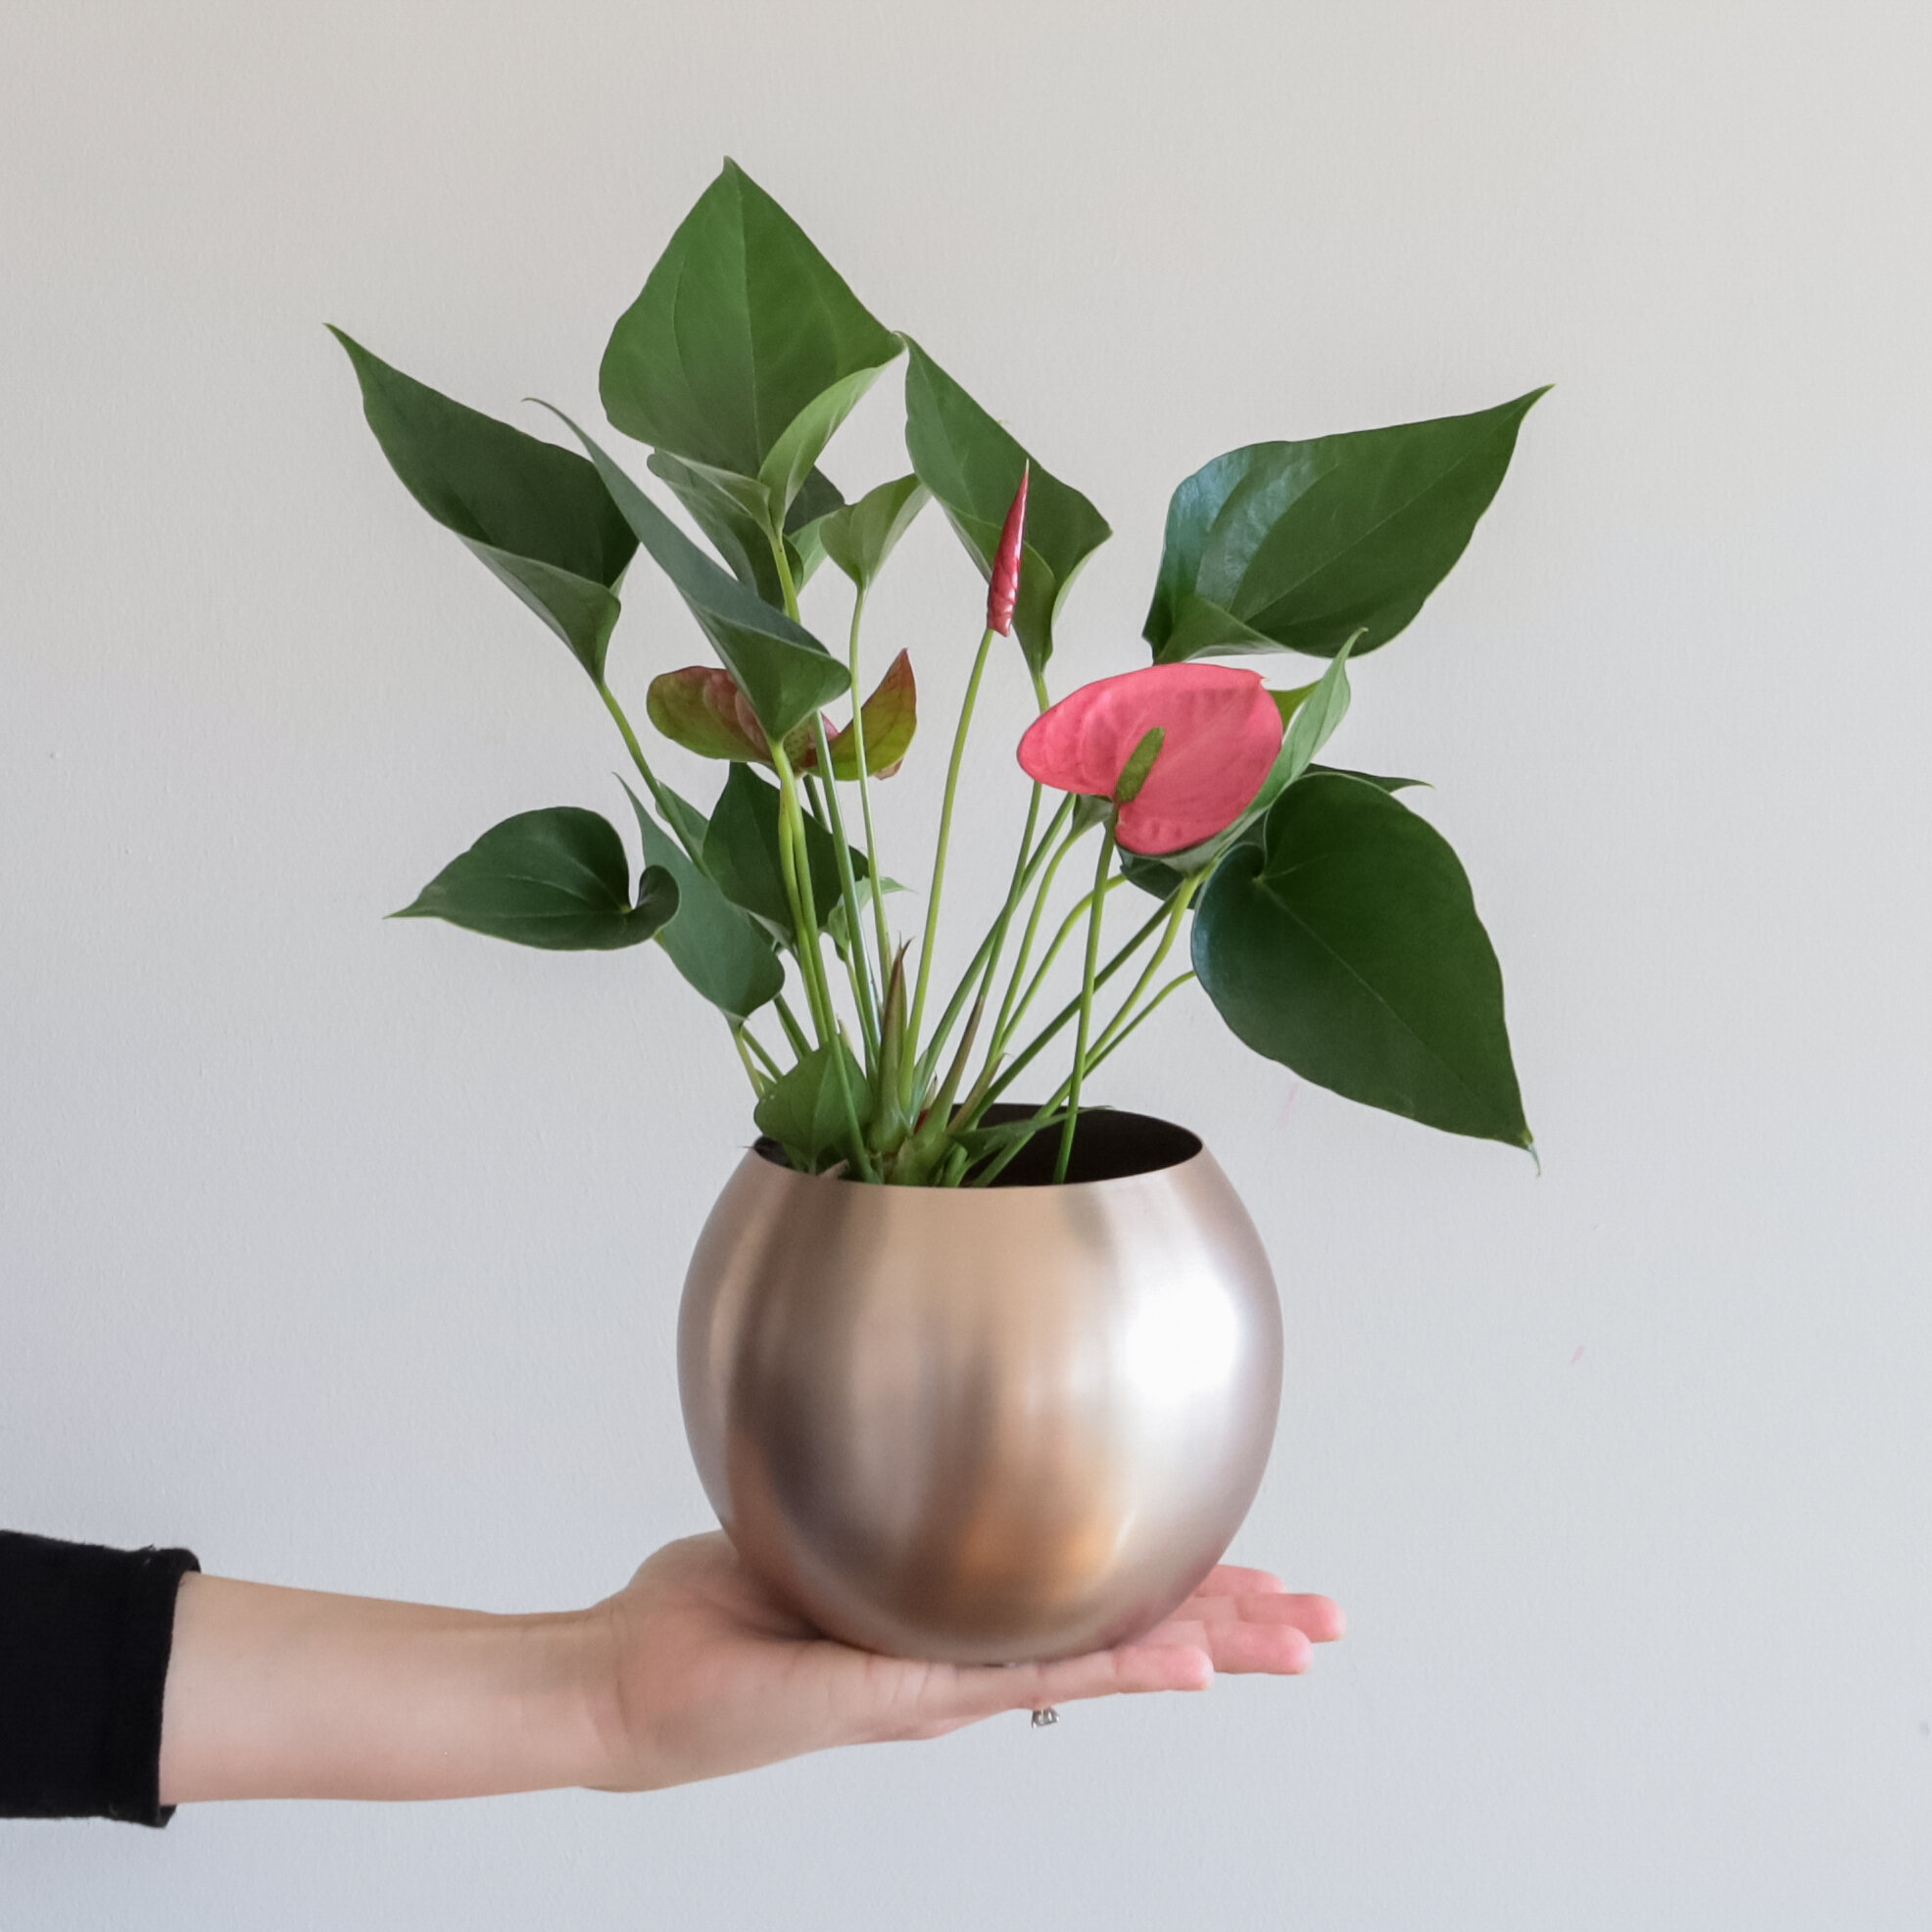 An Anthurium plant in a rose gold rounded pot being held up by a hand in front of a white background